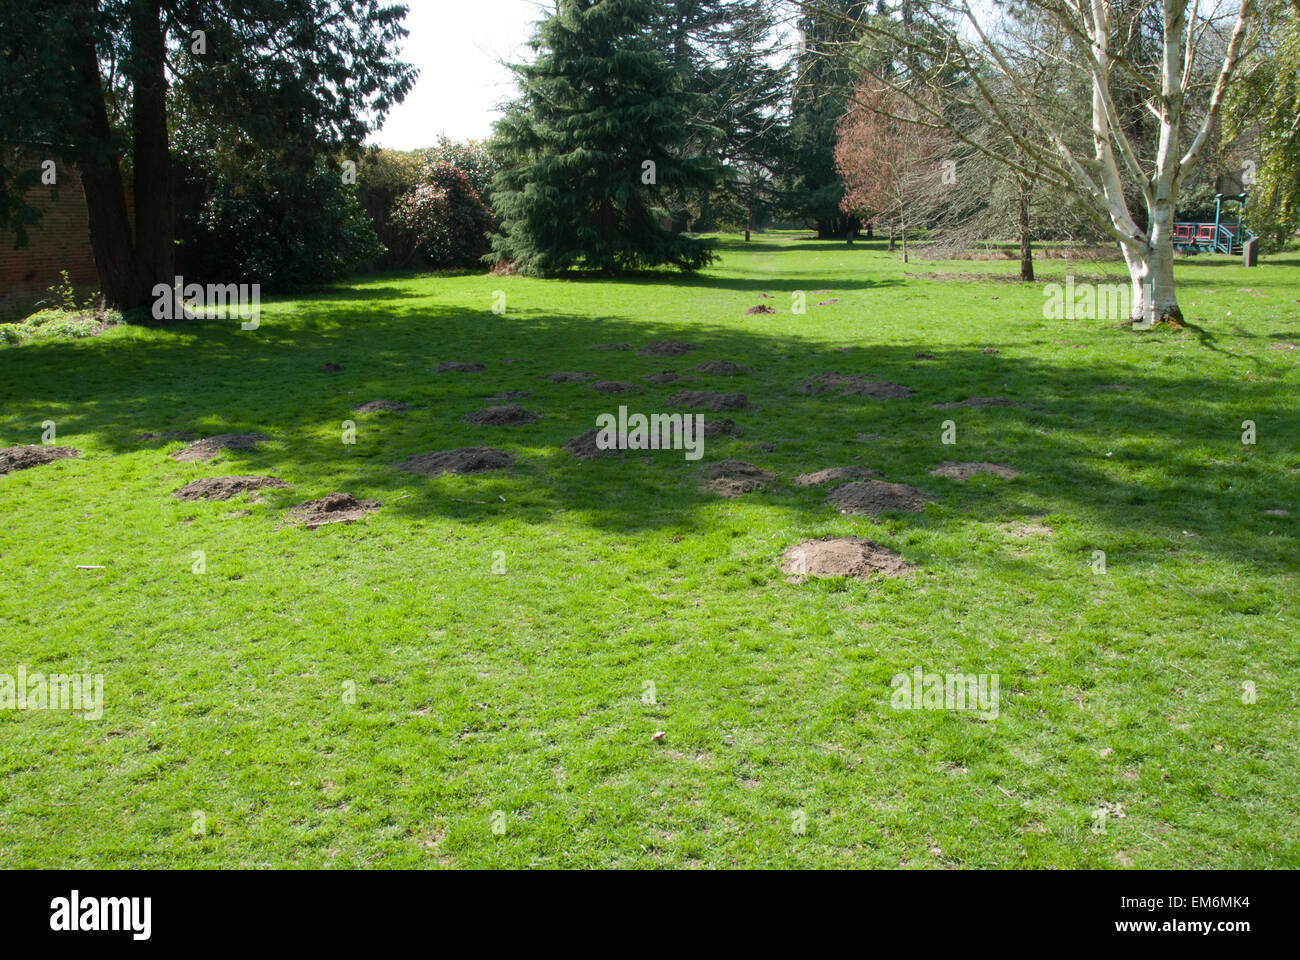 Excavated mounds of soil (molehills) at Langley Park in Buckinghamshire Stock Photo